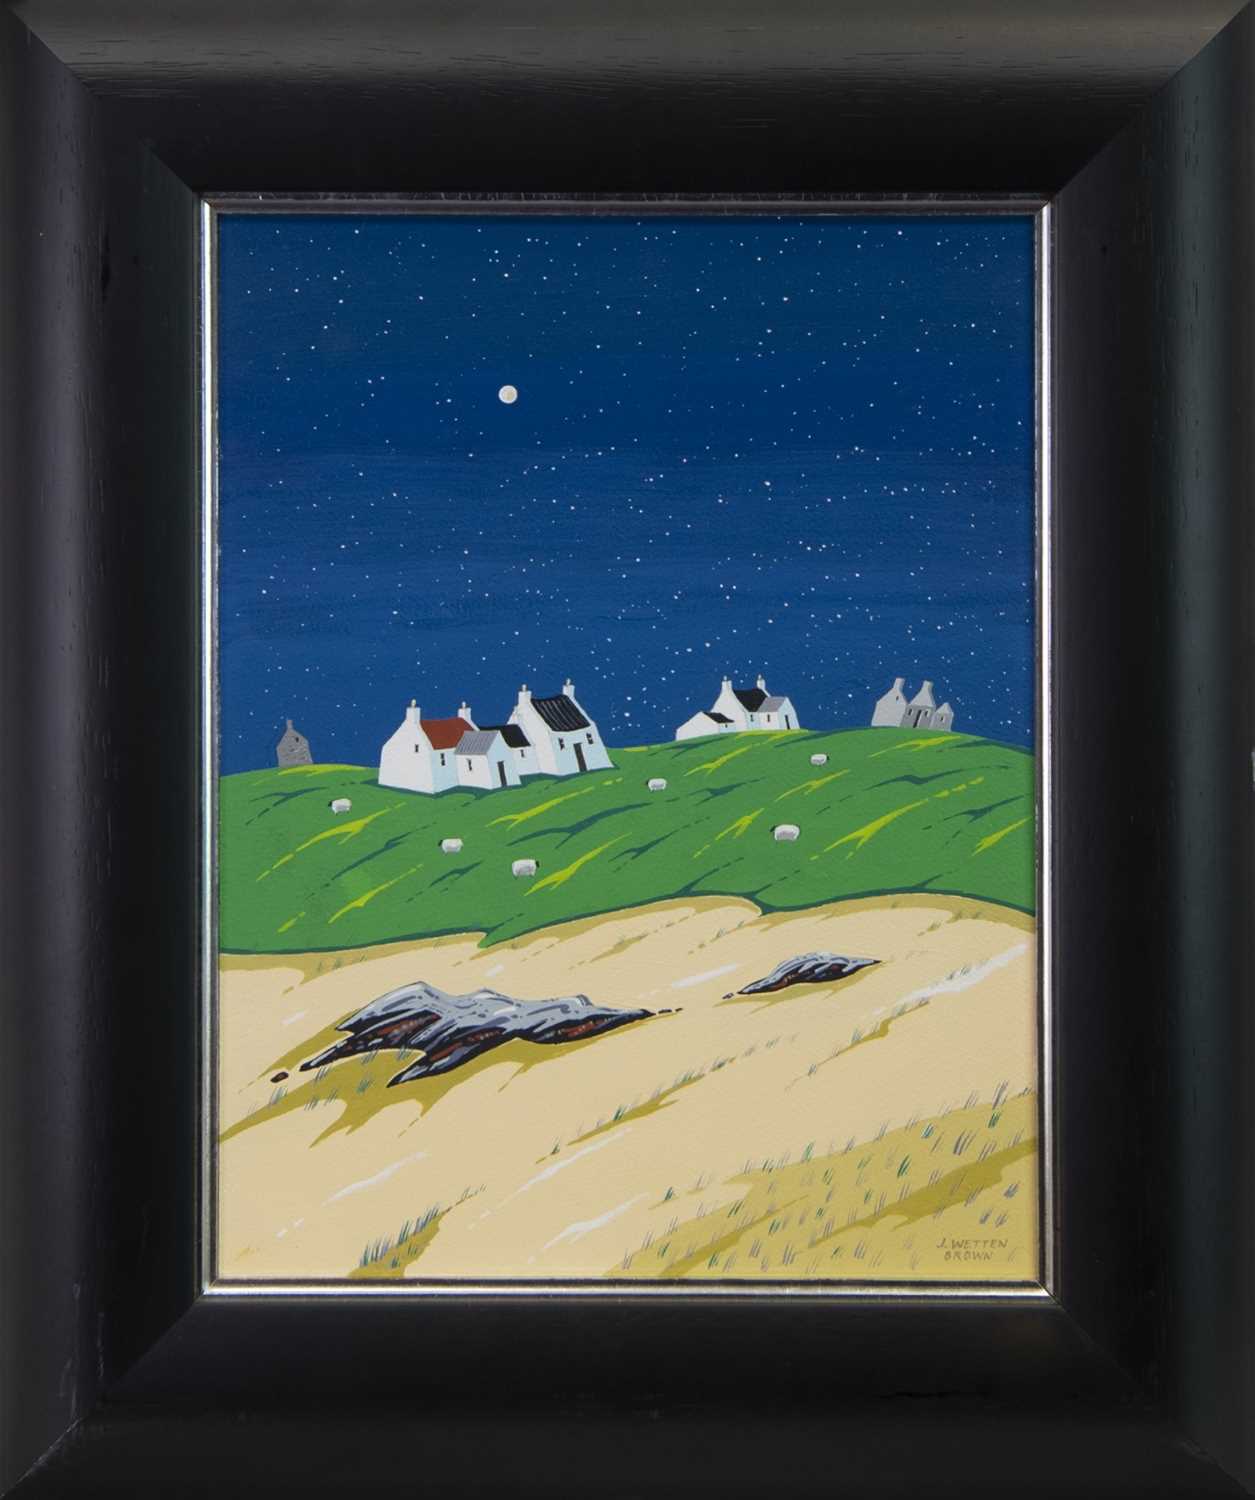 Lot 25 - MOONLIT COTTAGES AND SHEEP, BY JOHN WETTEN BROWN